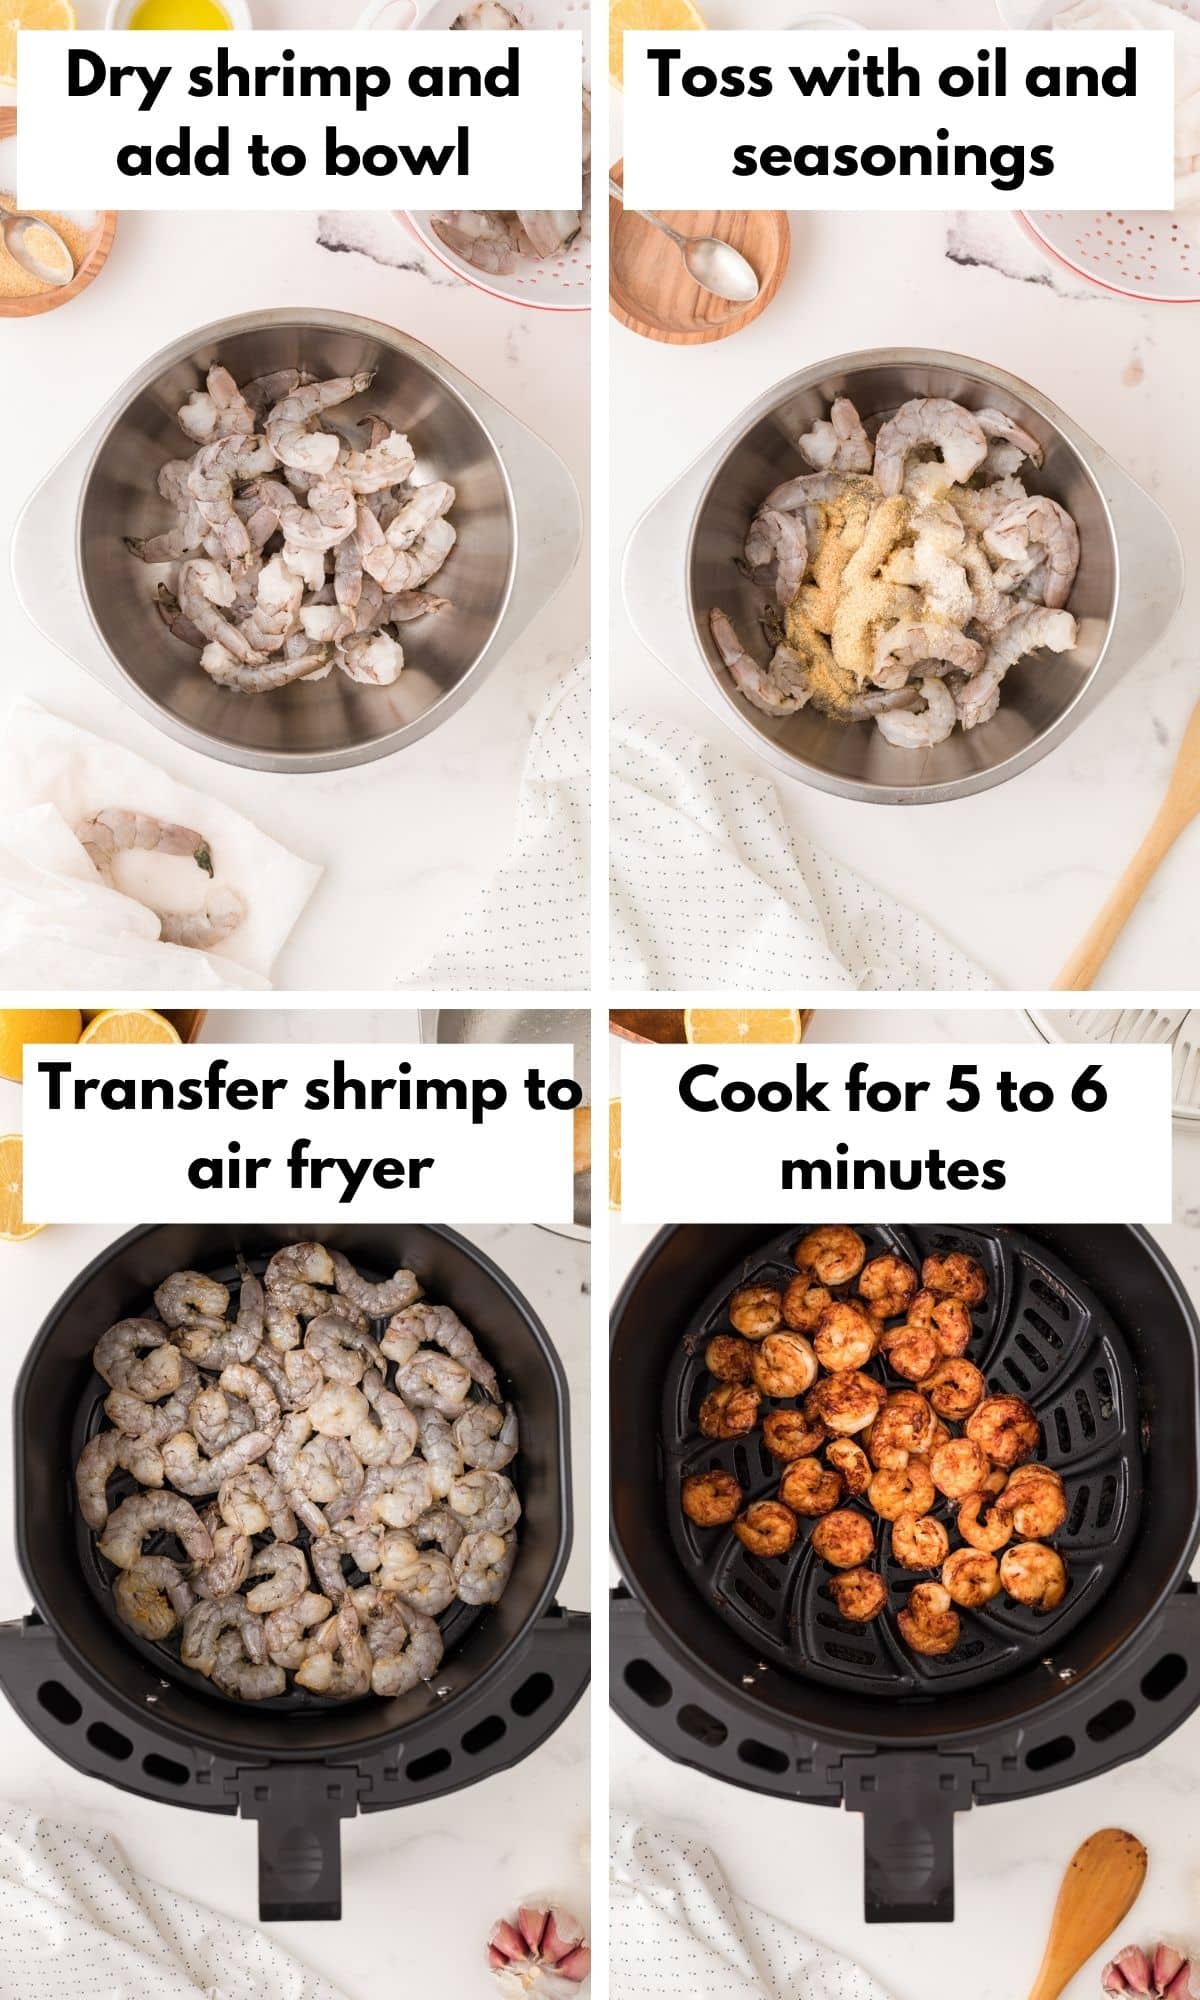 Pictures showing how to cook shrimp in air fryer.